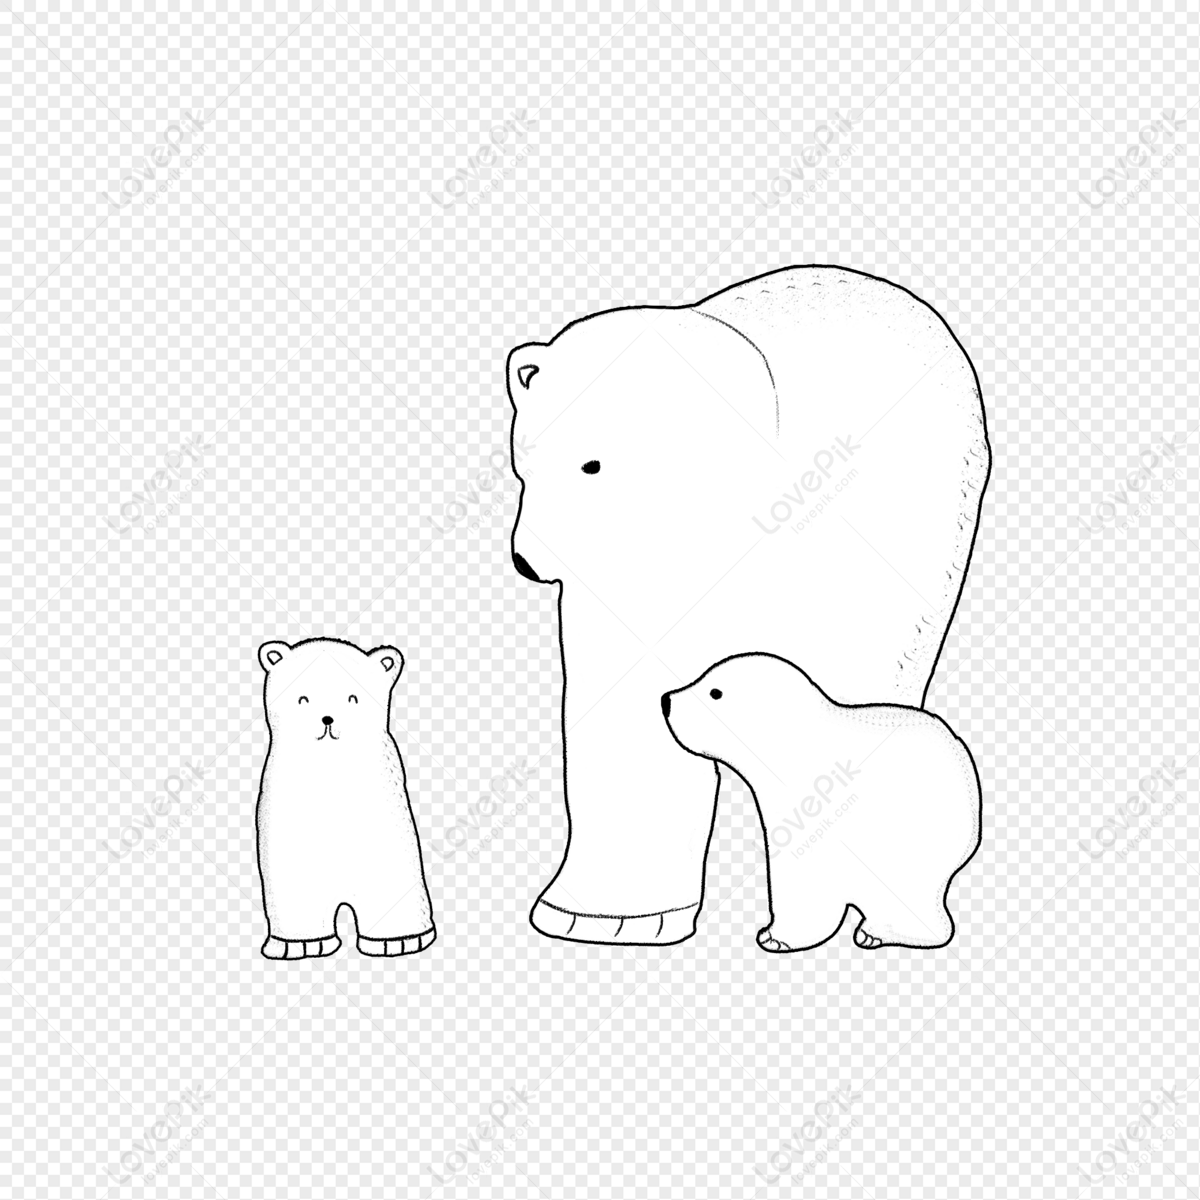 Polar Bear Family Cartoon Image PNG White Transparent And Clipart Image For  Free Download - Lovepik | 401284612